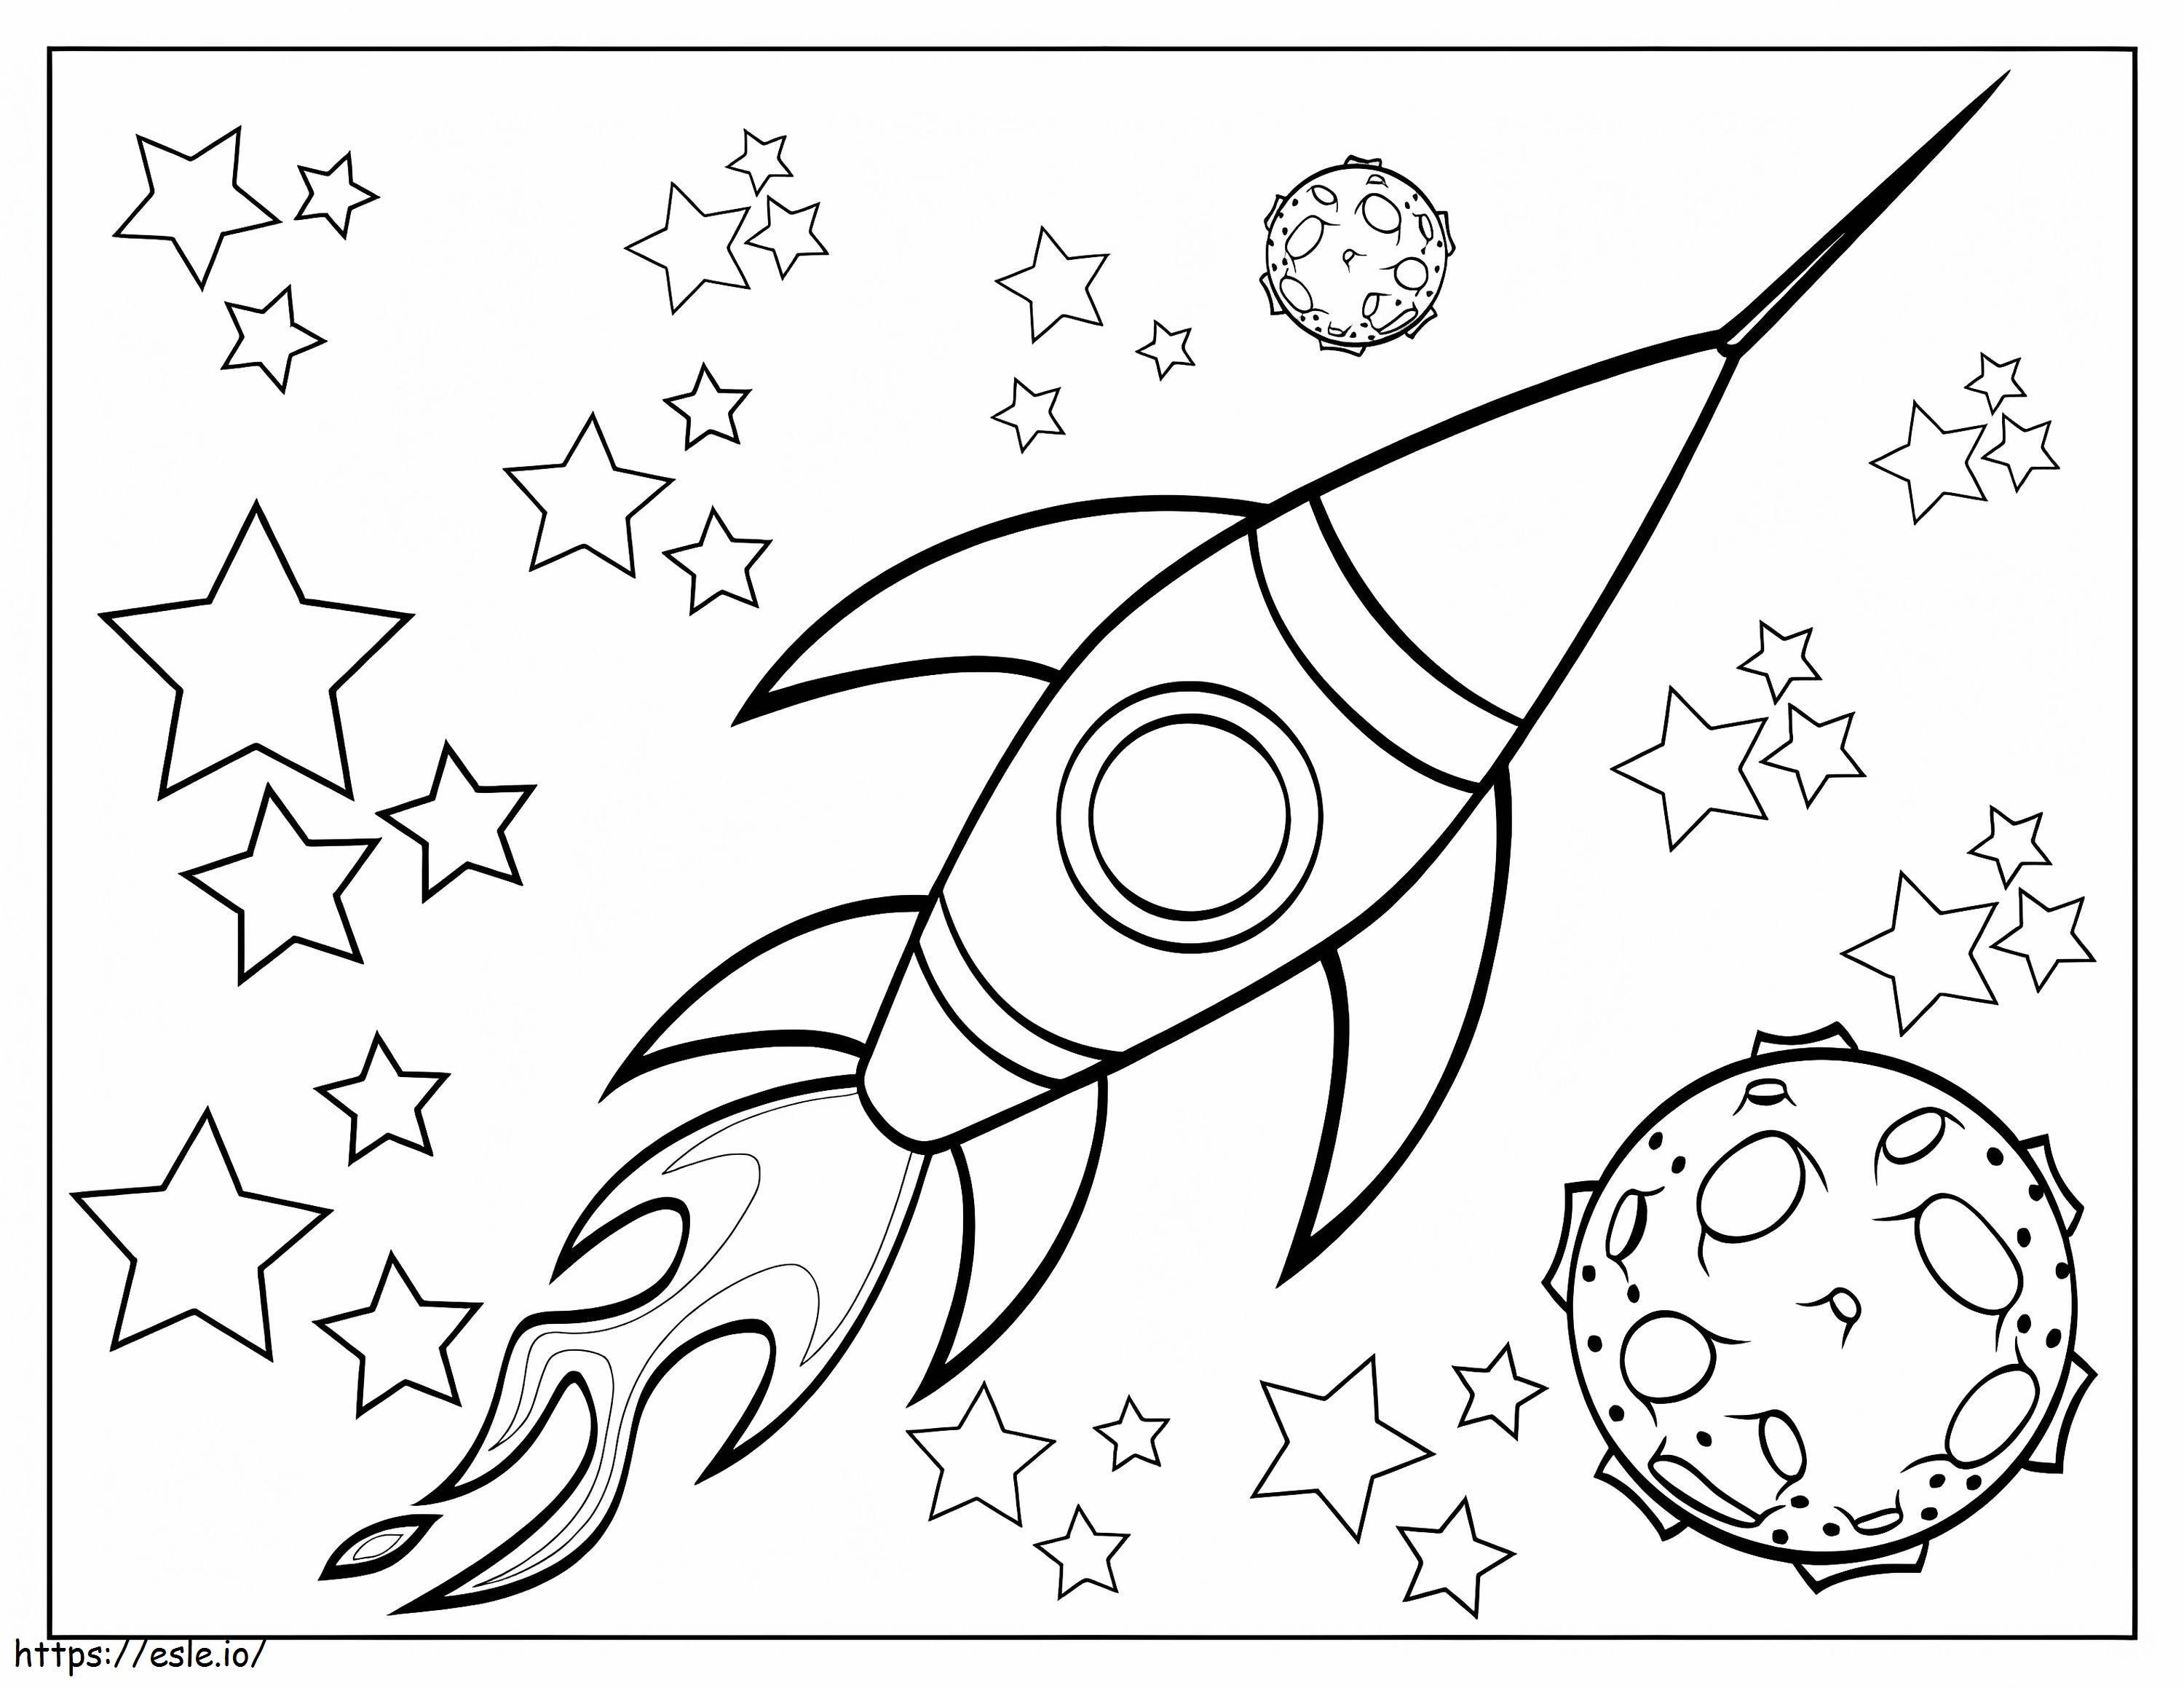 Stars And Planets coloring page